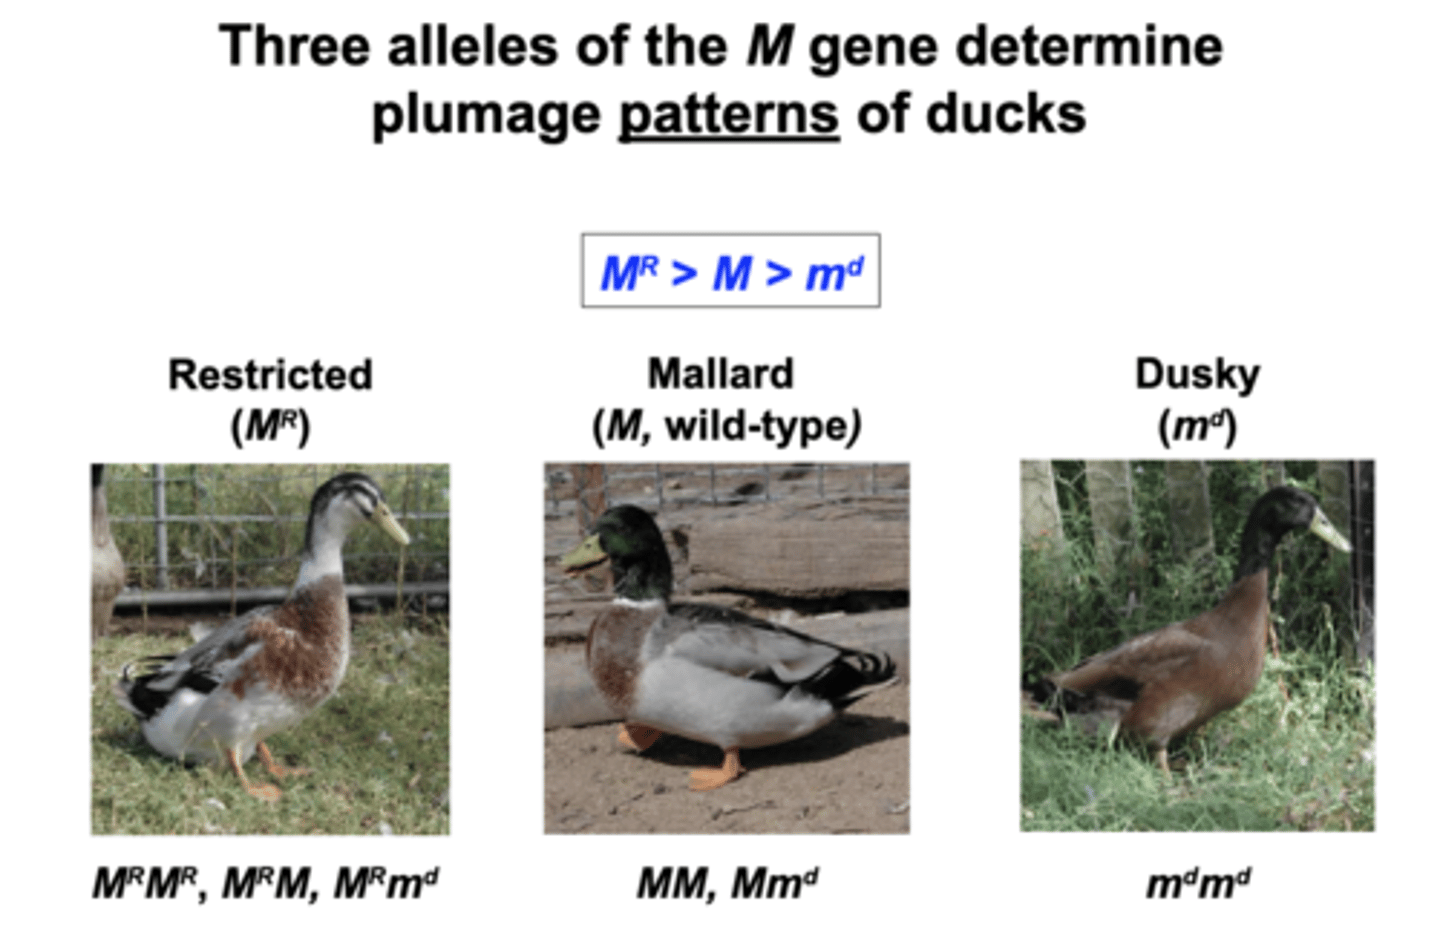 <p>_____________= Multiple alleles of a gene can exist in natural populations, in domesticated animals, and in lab strains</p>